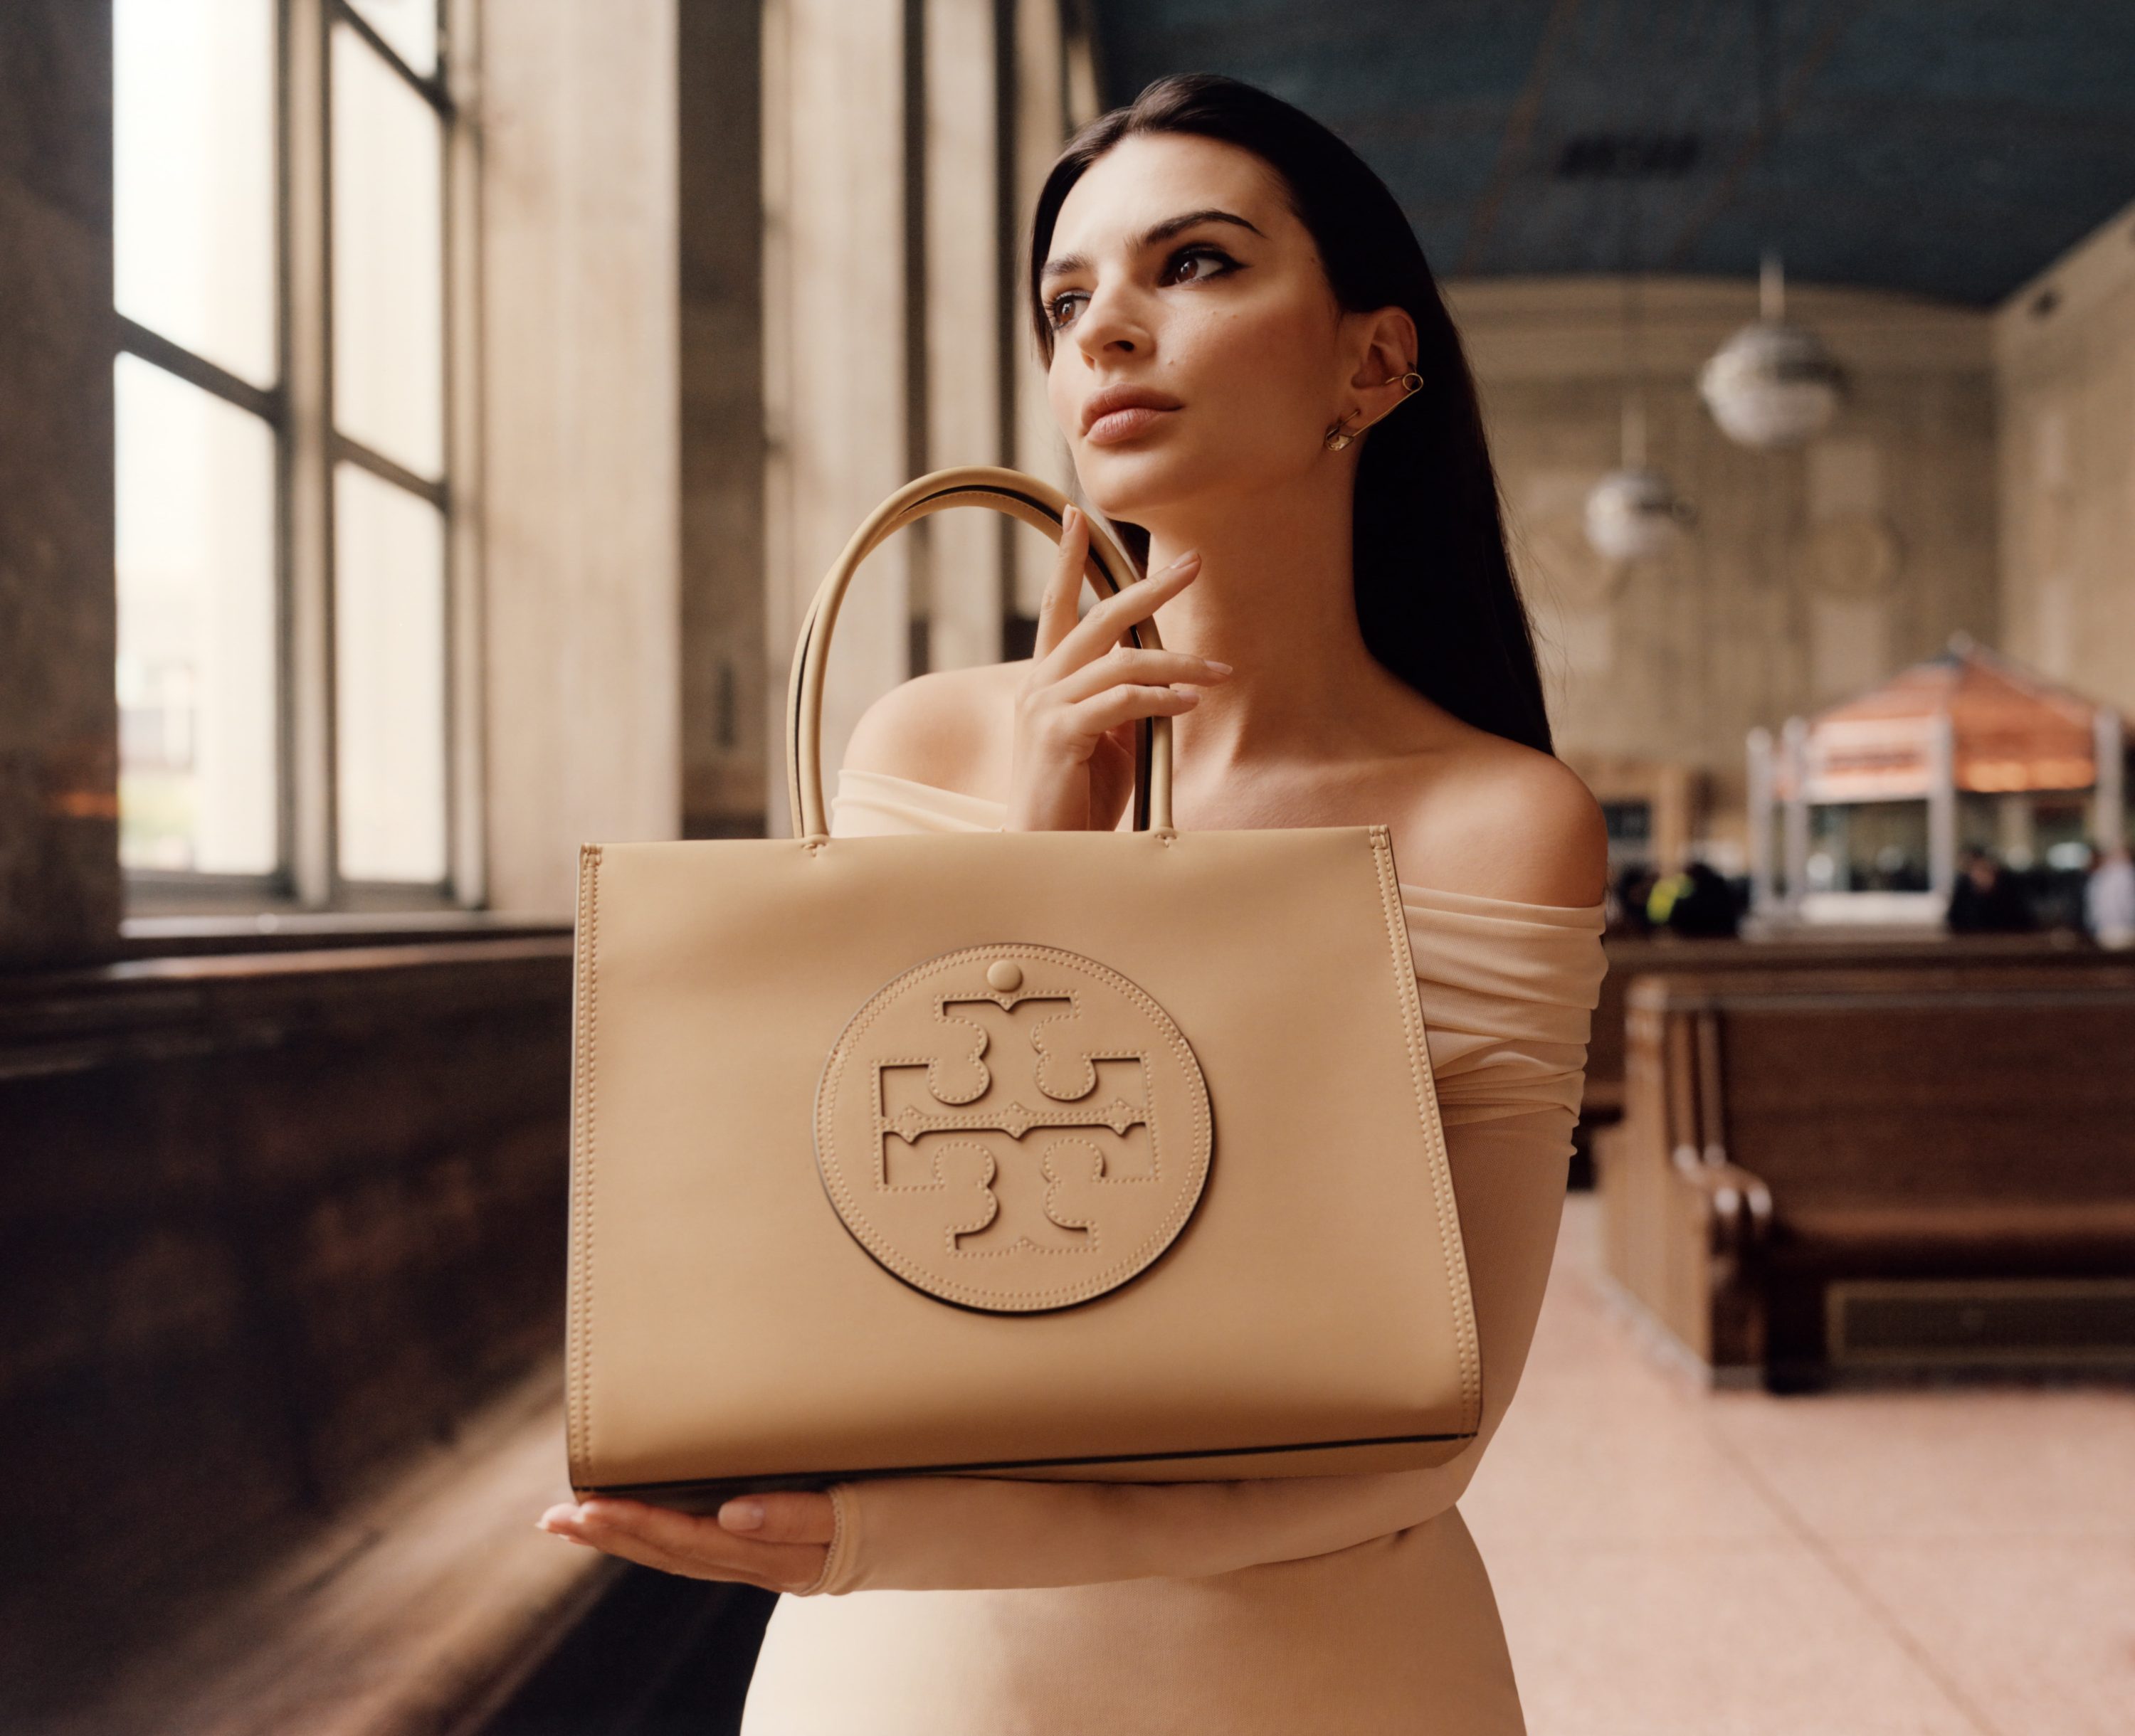 Tory Burch Fall 2023 Ad Campaign